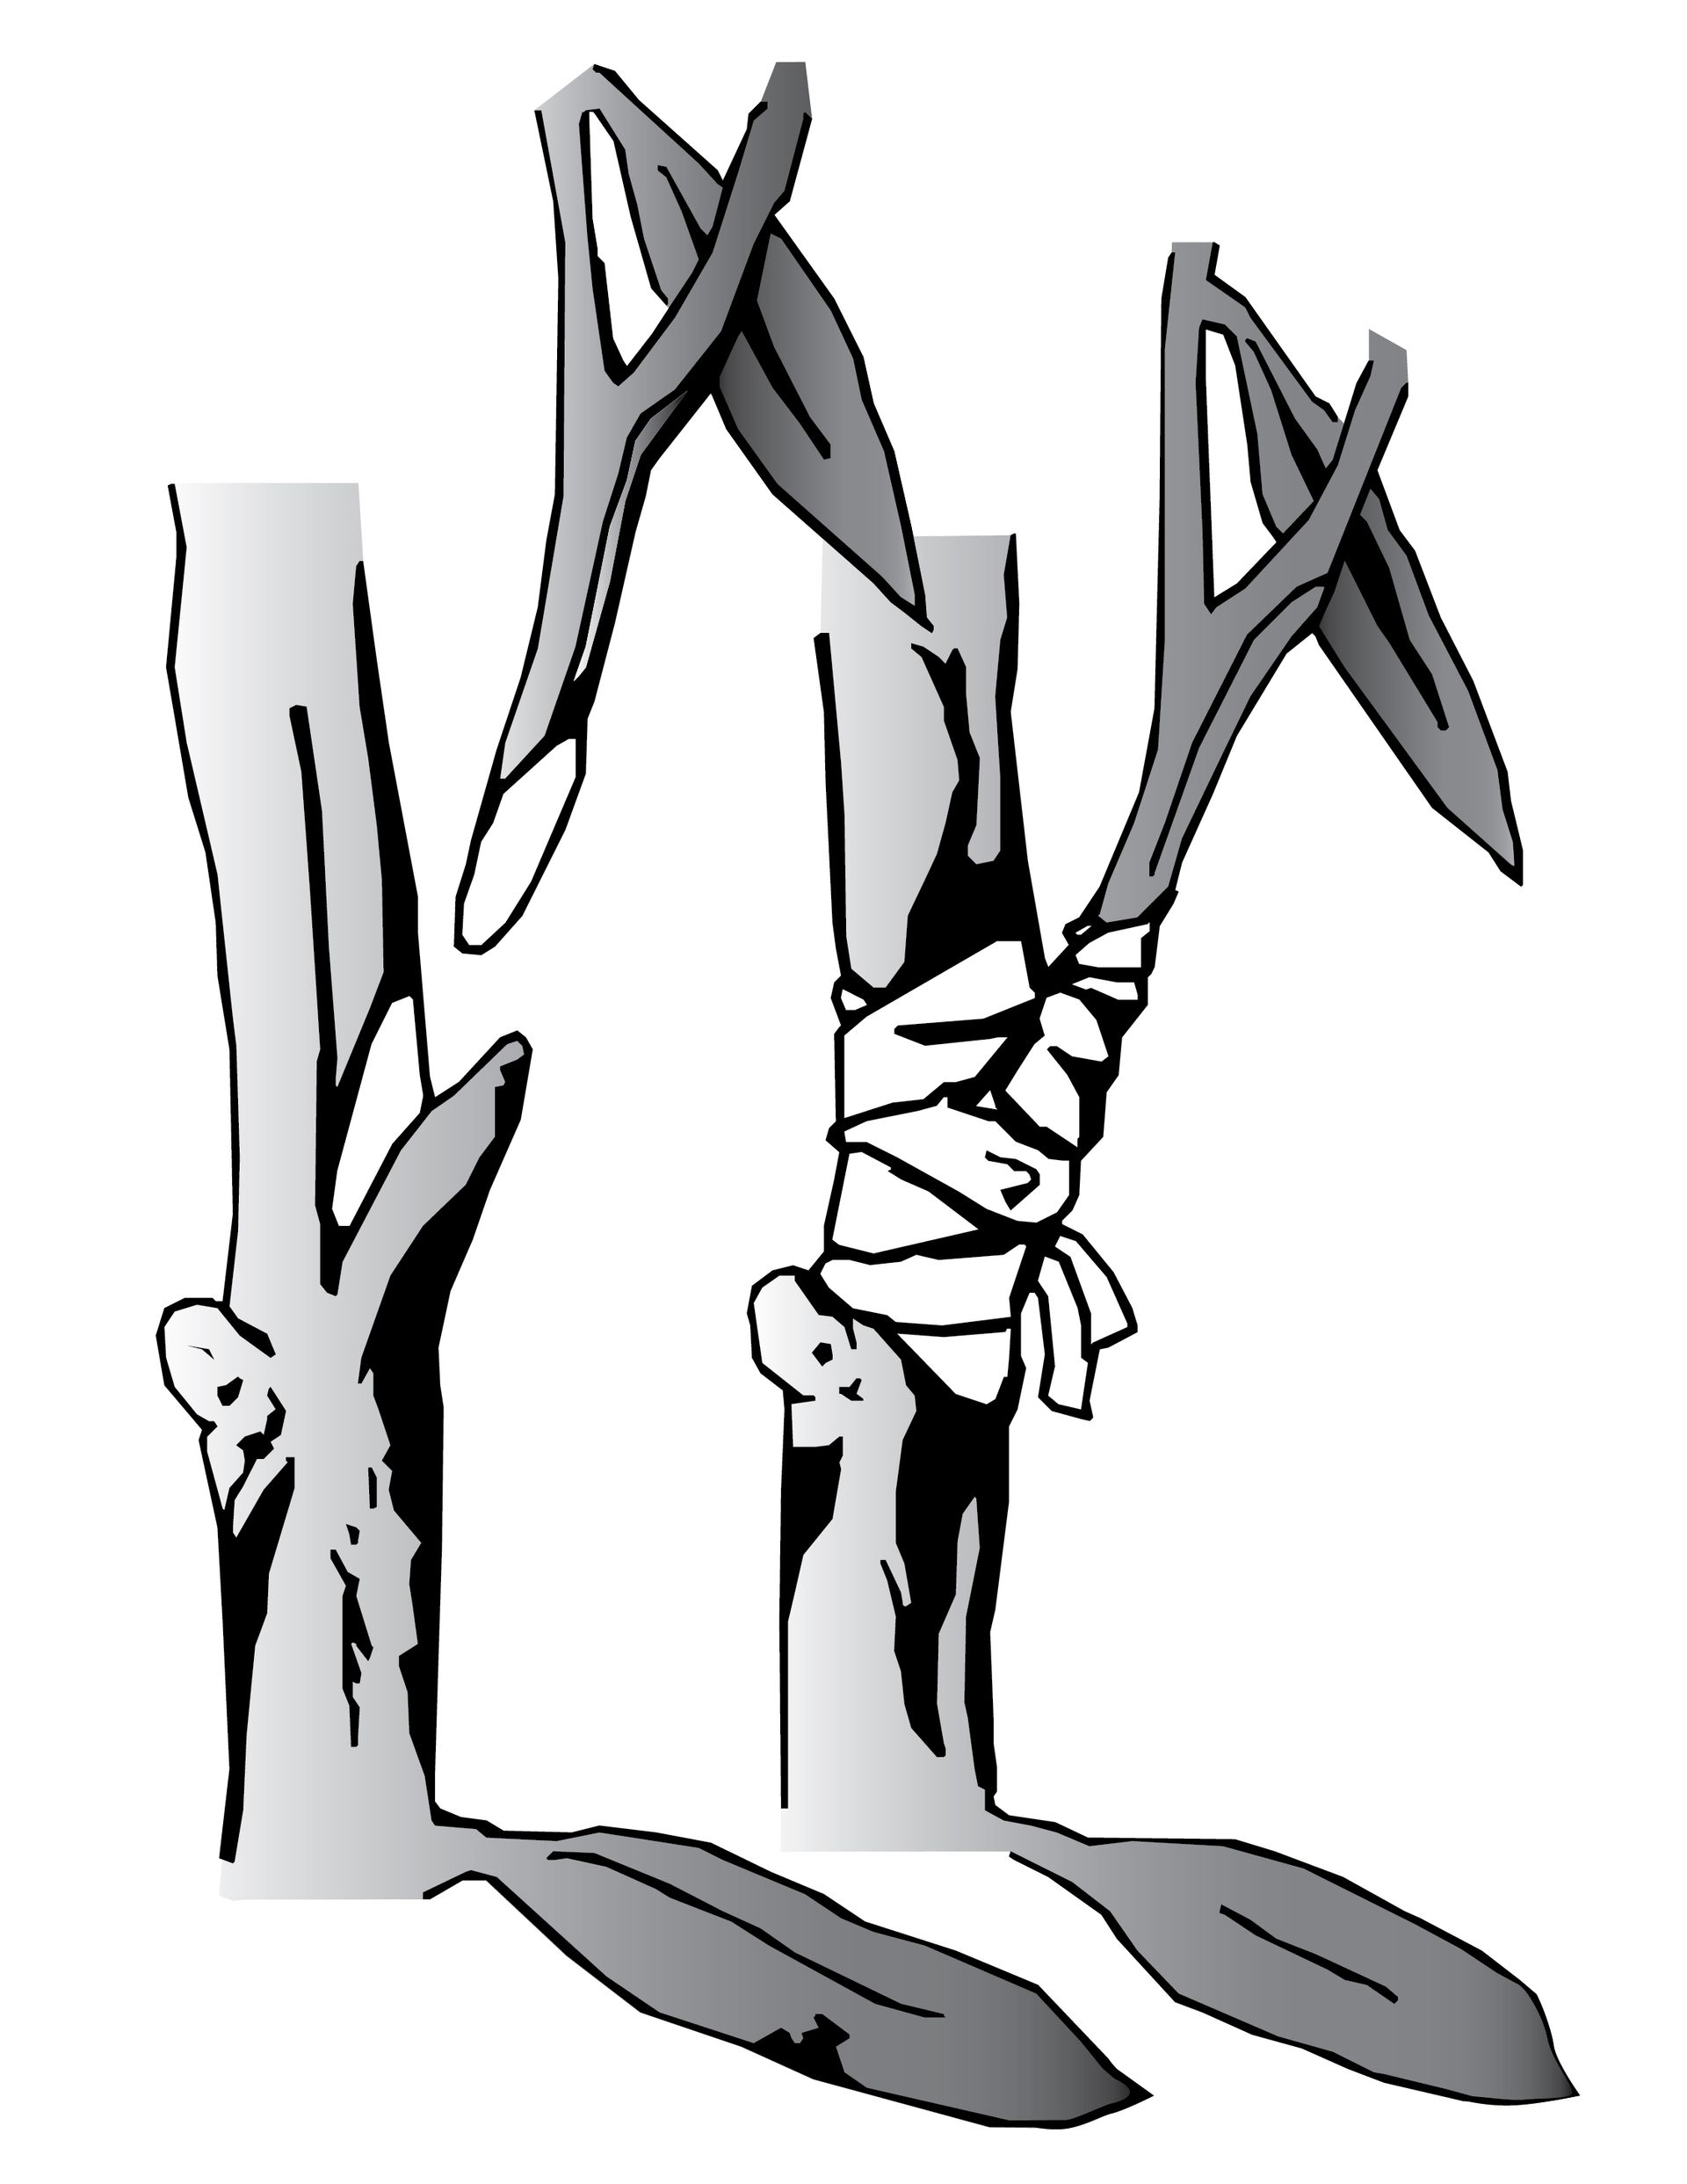 An illustration demonstrating the grafting of a branch into a tree.